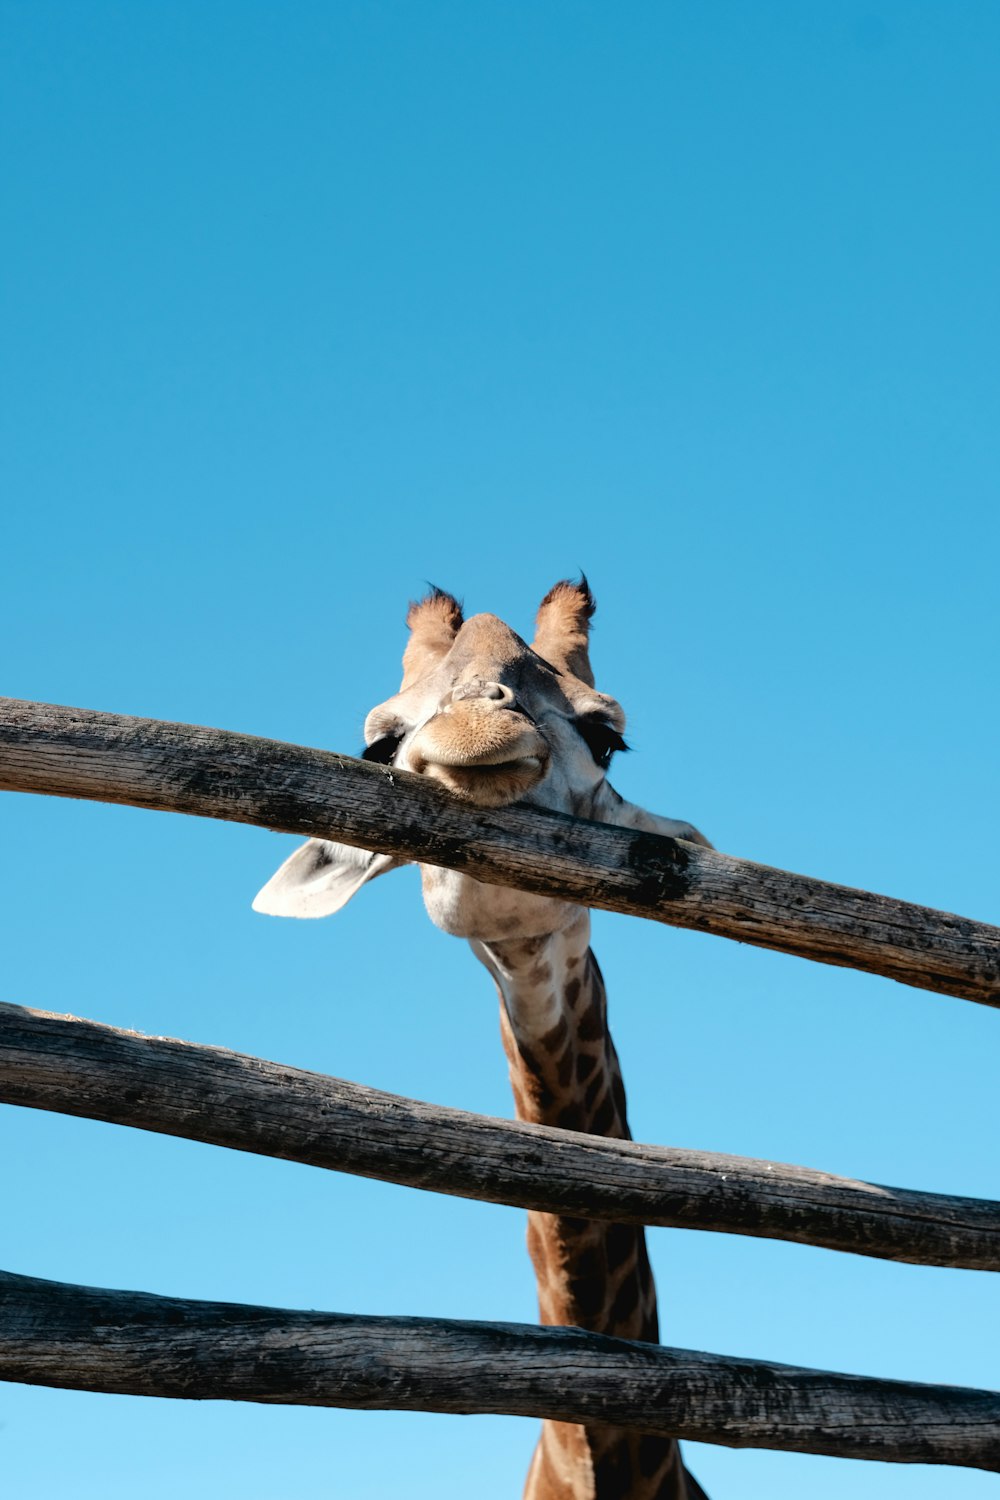 brown and white giraffe on brown wooden fence under blue sky during daytime